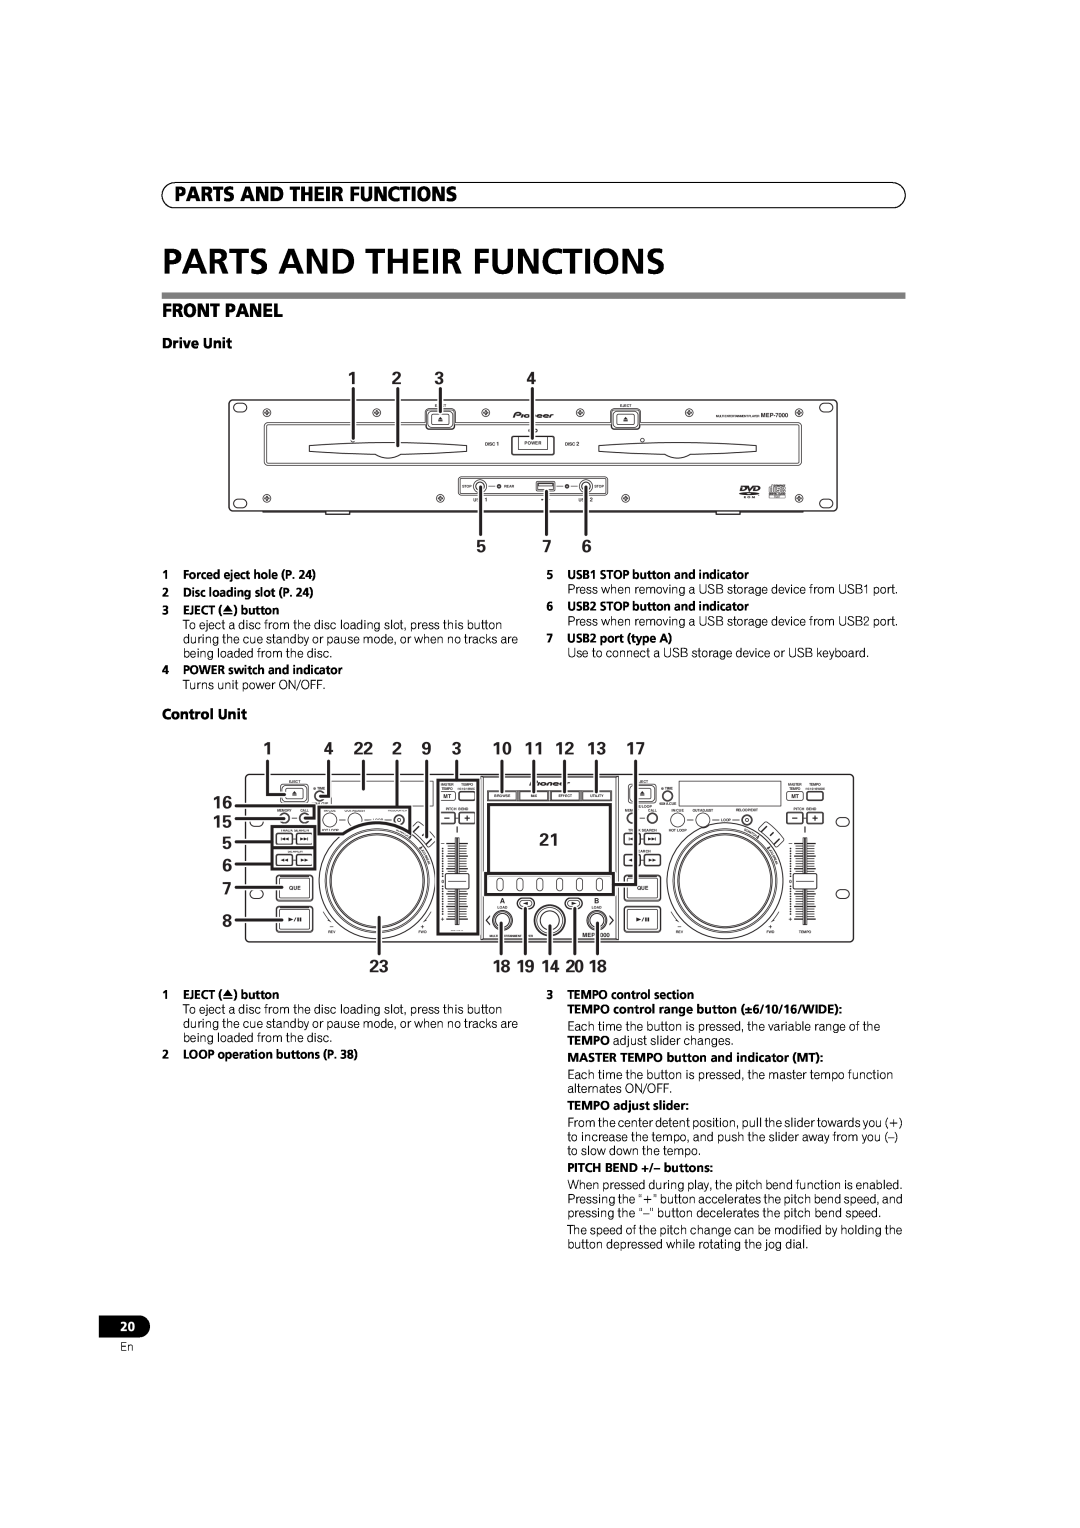 Pioneer MEP-7000 operating instructions Parts And Their Functions, Front Panel 